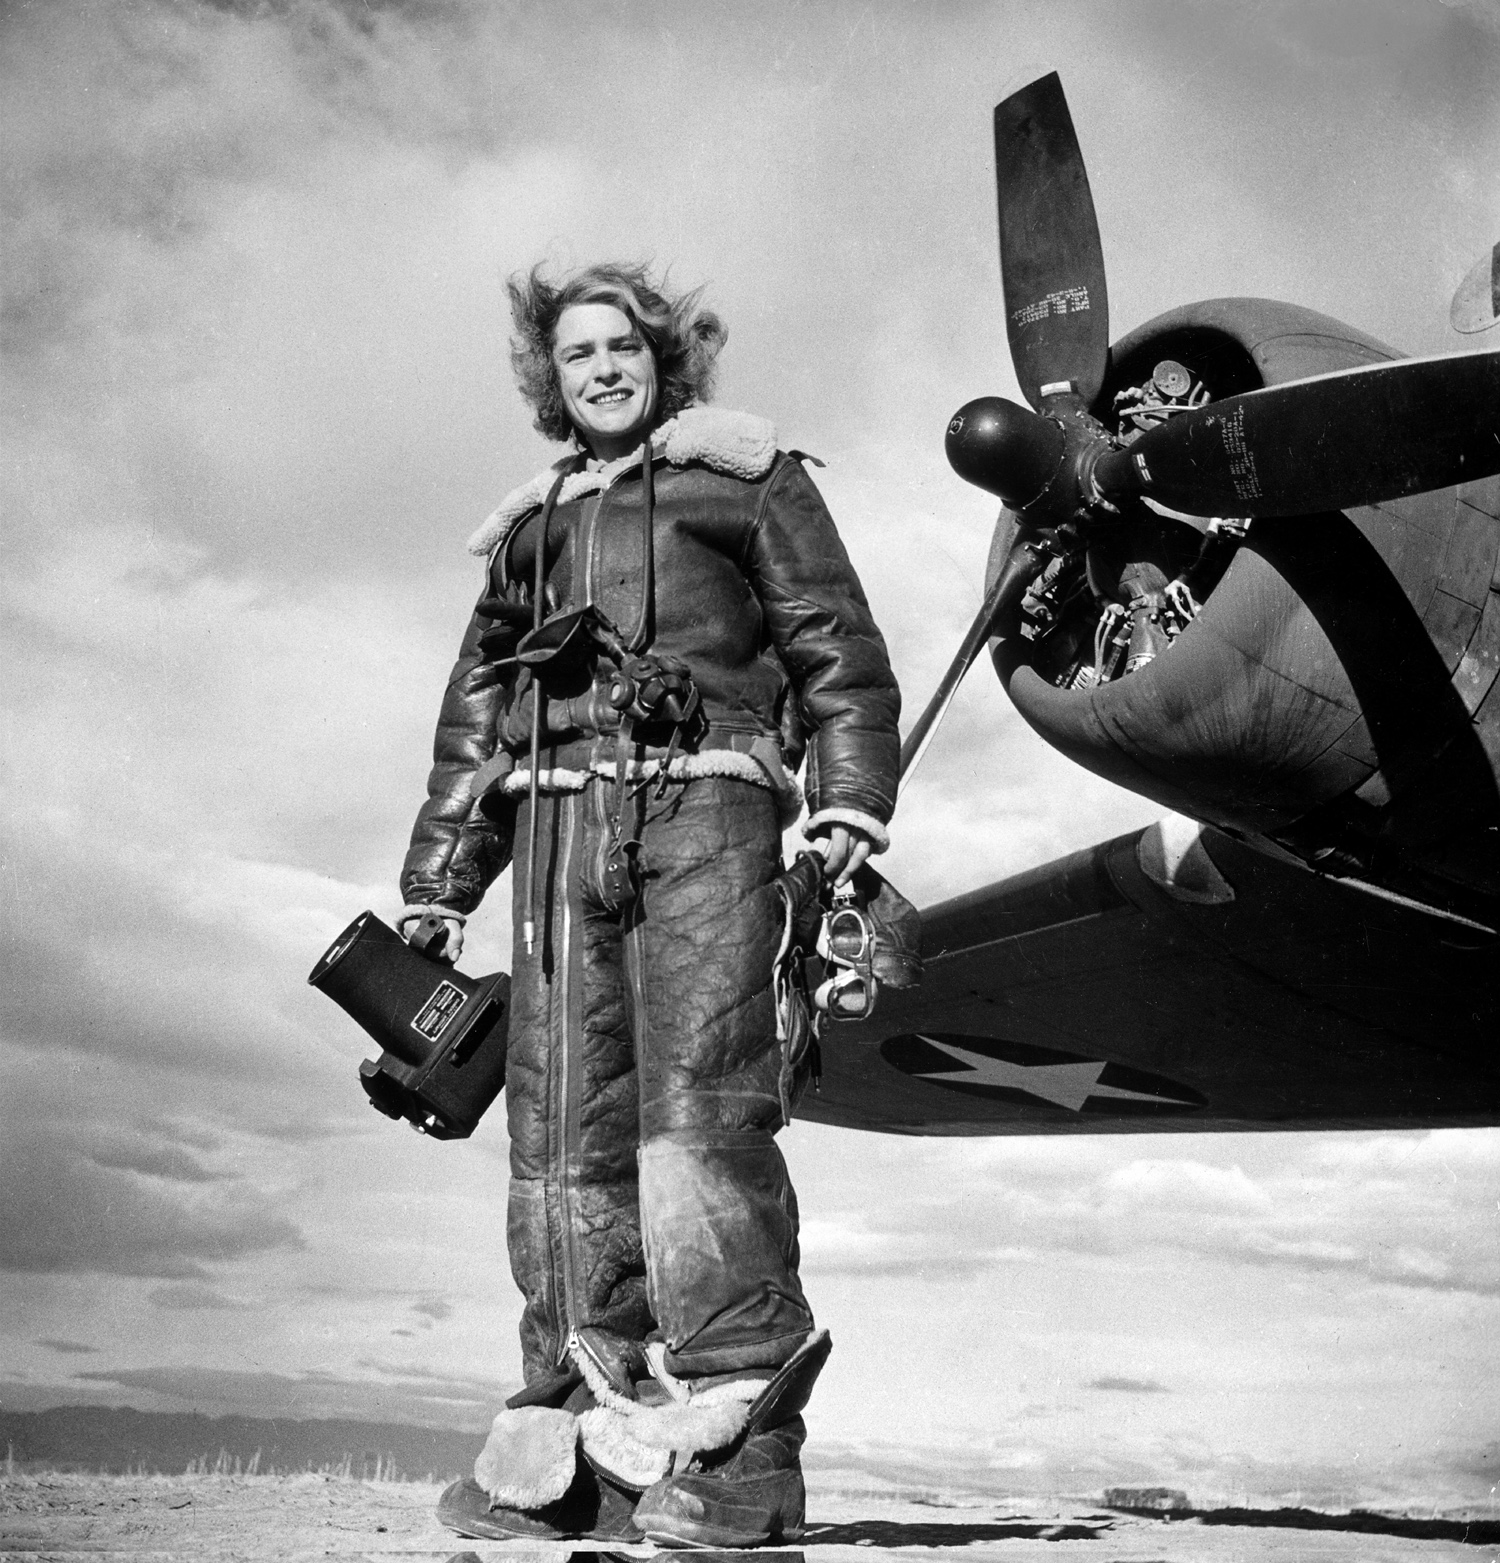 LIFE photographer Margaret Bourke-White clad in fleece flight suit while holding aerial camera, standing in front of Flying Fortress bomber in which she made combat mission photographs of the US attack on Tunis.